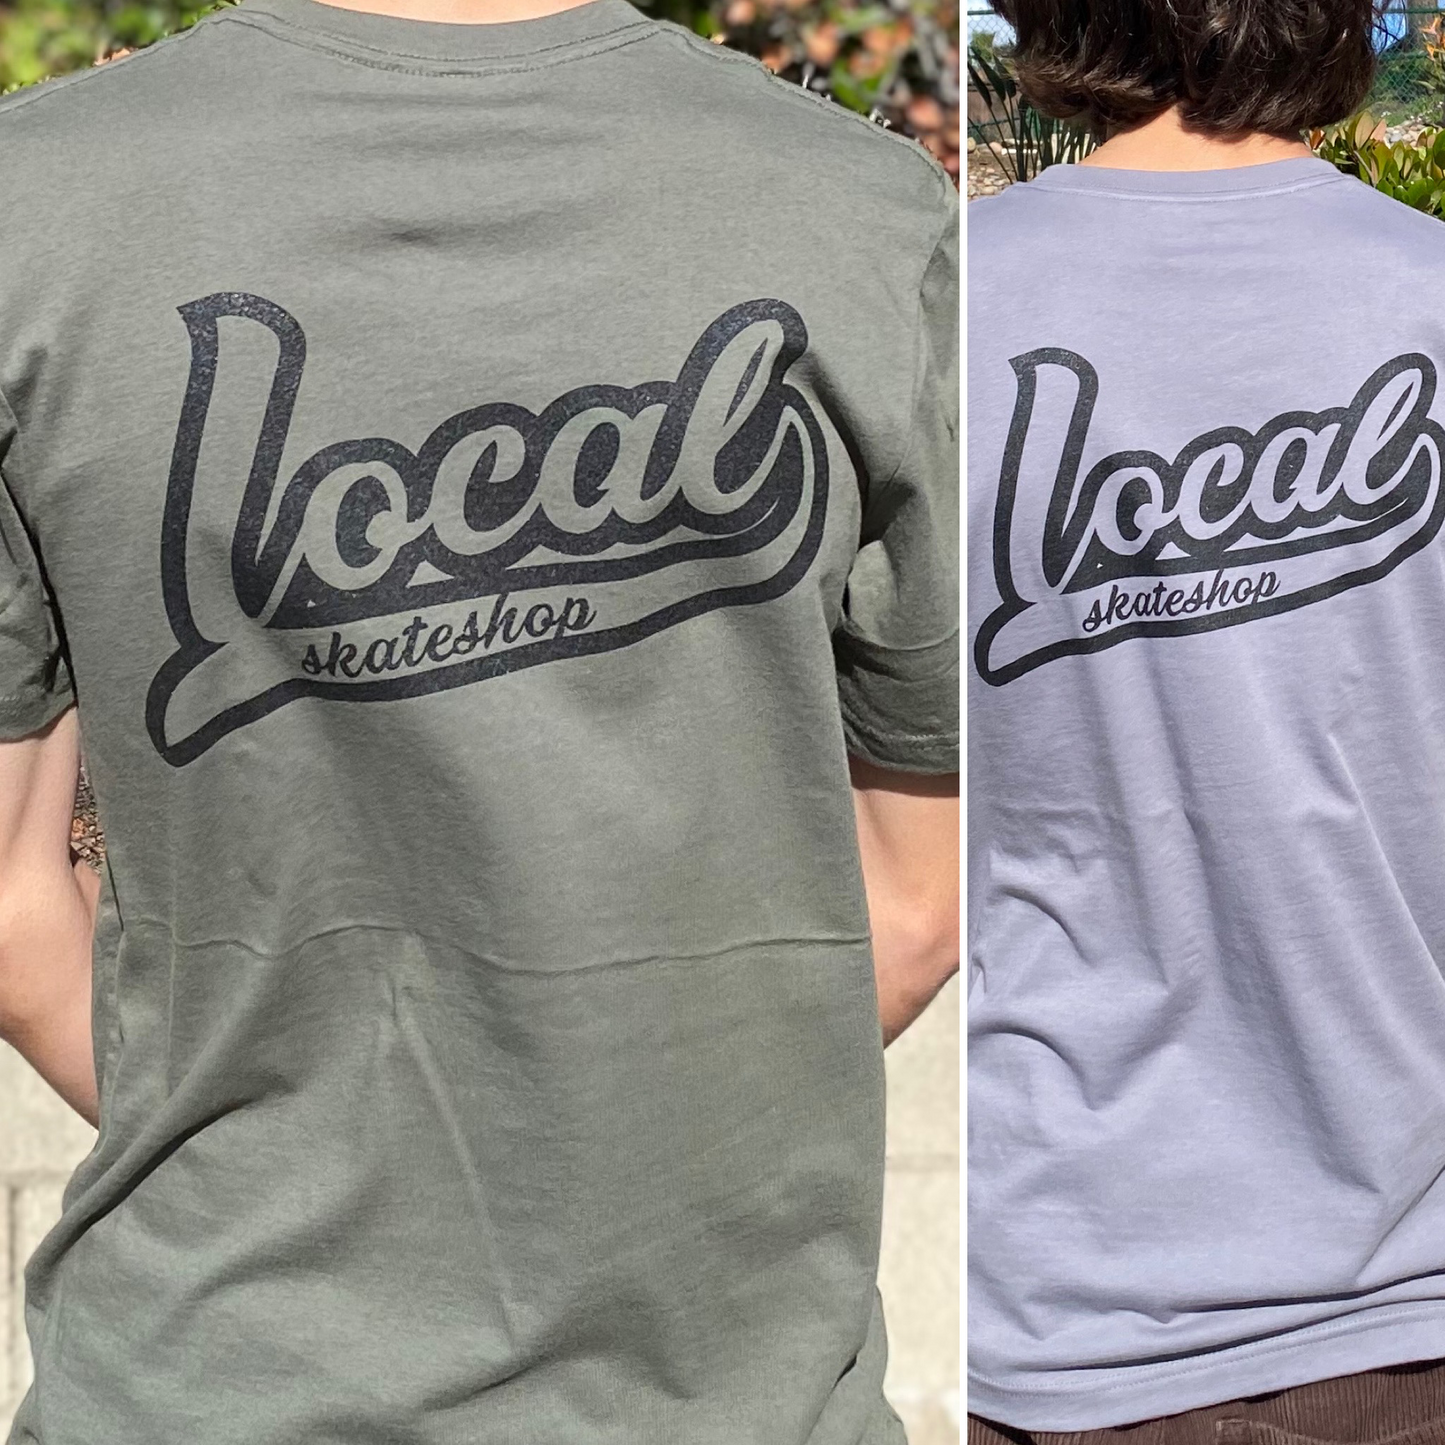 local athletic logo tees available in multiple colors & sizes.